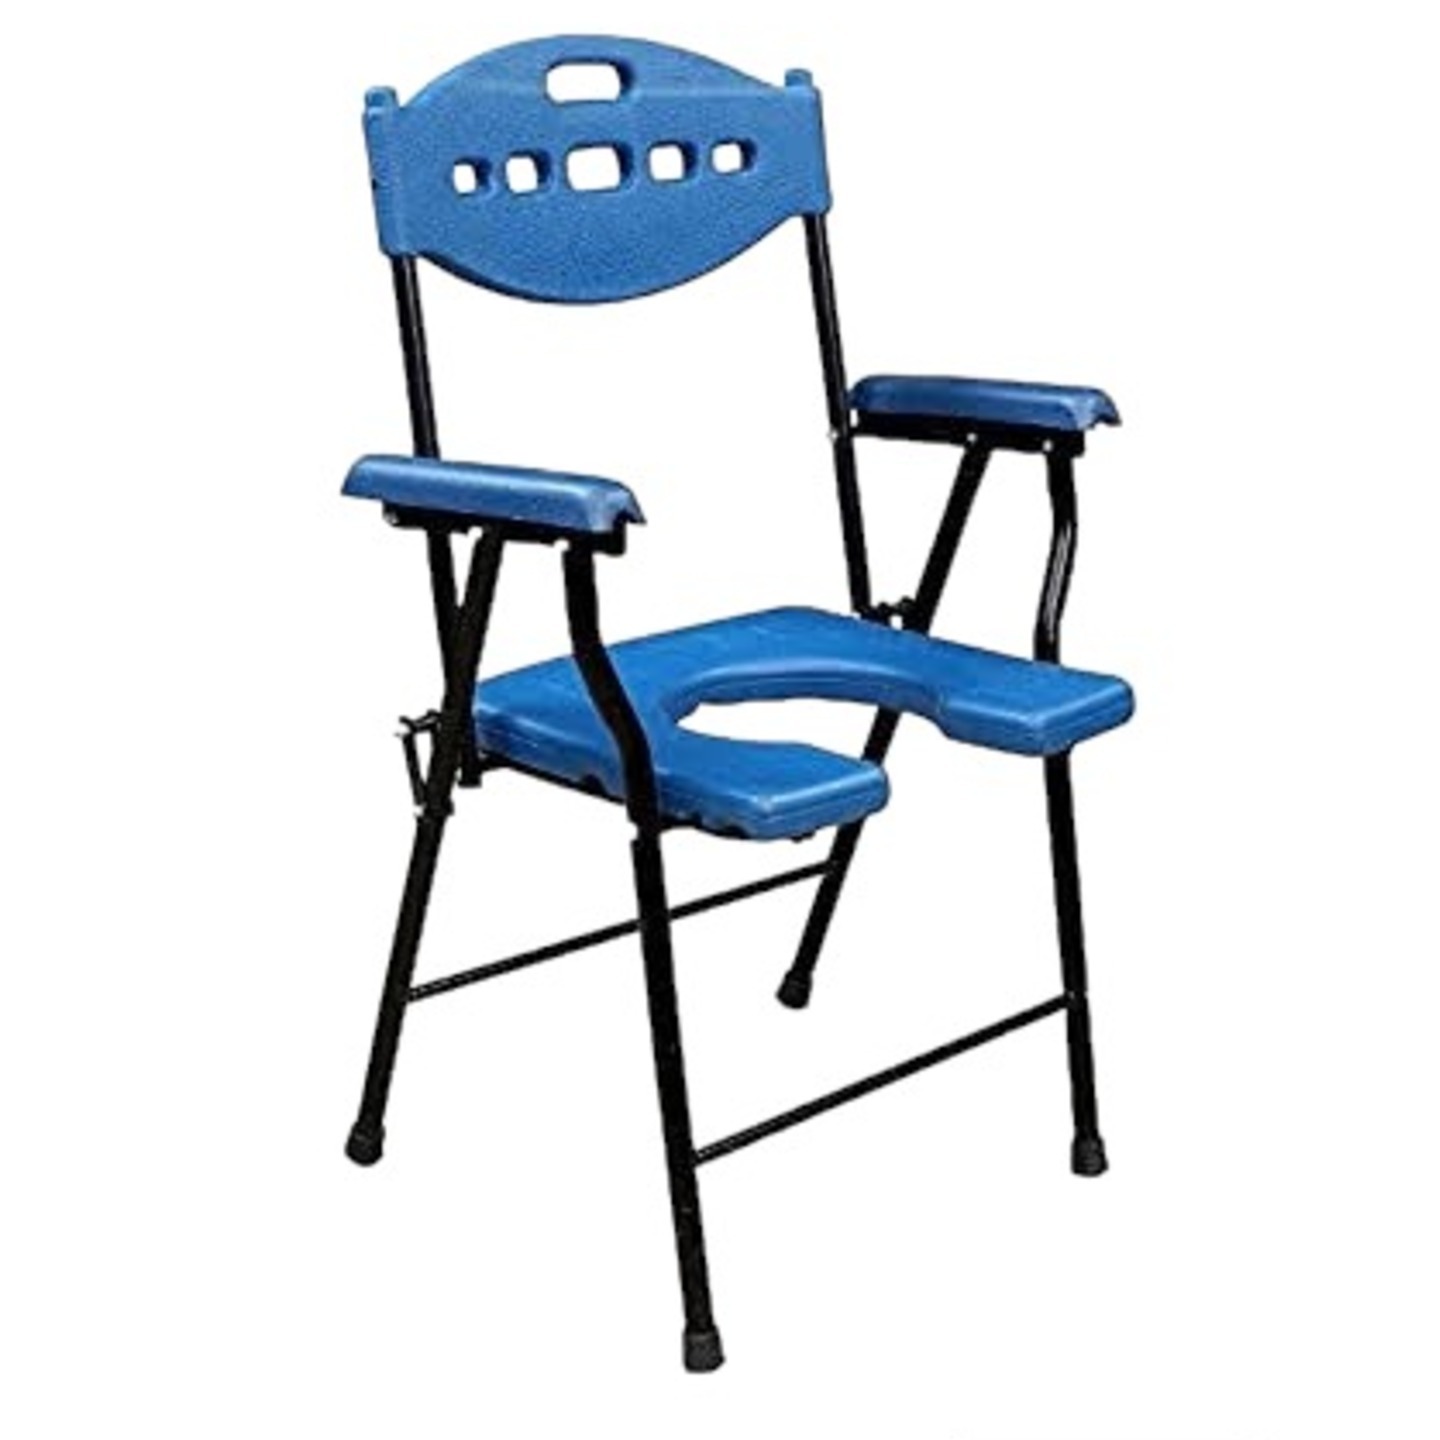 Shower Chair Foldable with Arm & Back Rest